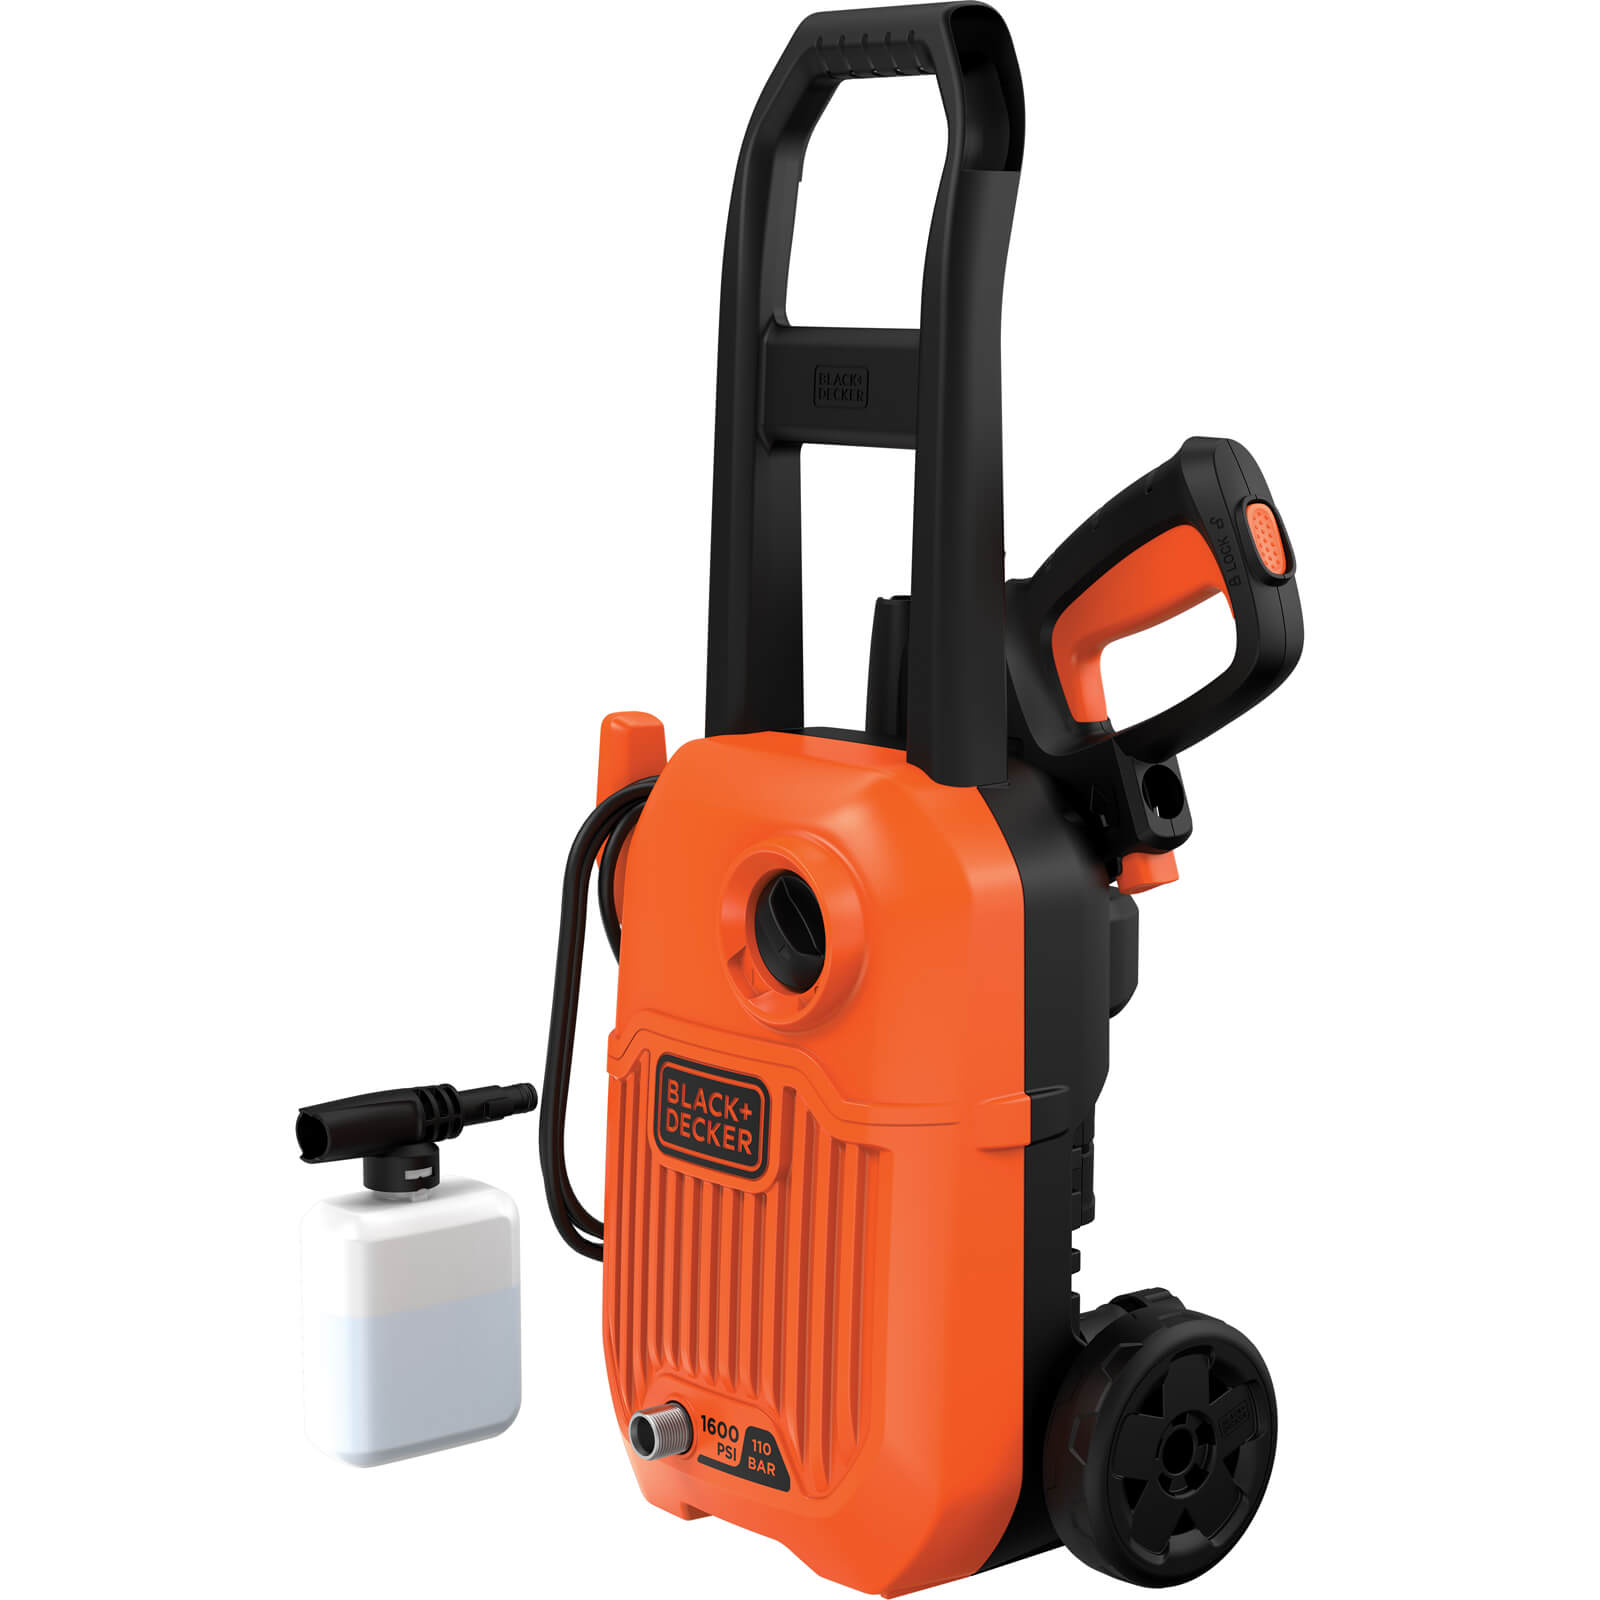 Image of Black and Decker BEPW1300 Pressure Washer 110 Bar